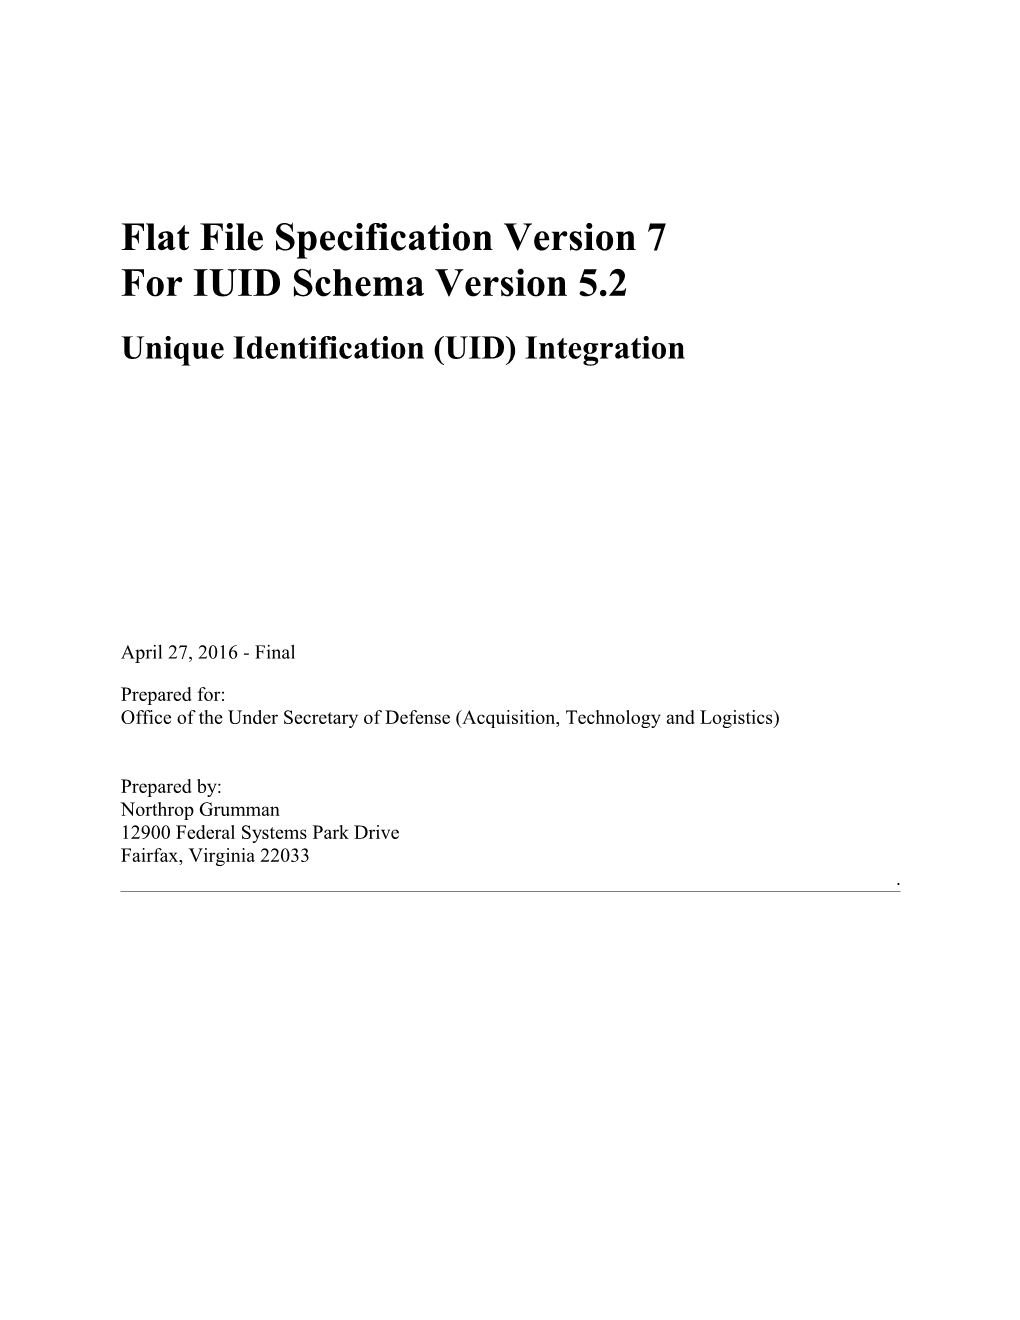 Flat File Specification Version 7